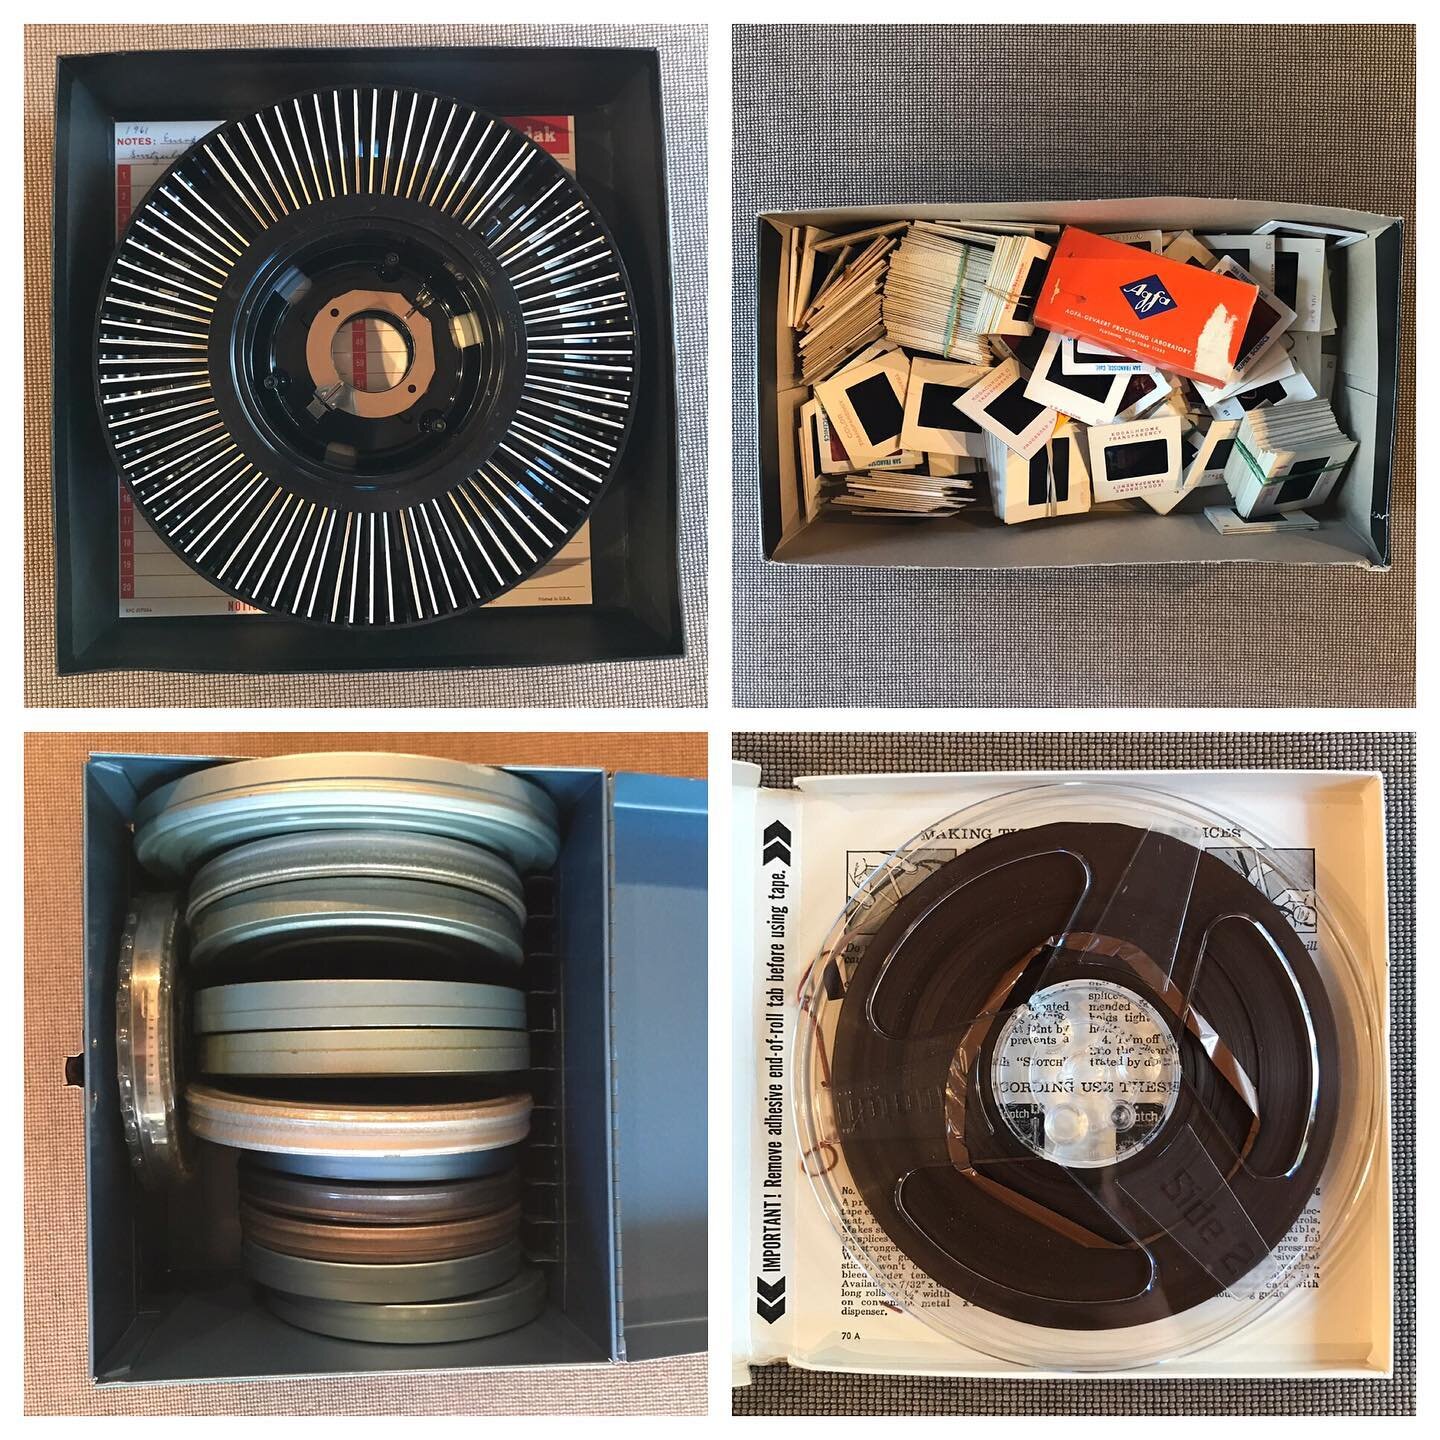 FOUND: my client&rsquo;s long lost slides and film reels from her adventures around the world! 
While emptying closets that hadn&rsquo;t been touched in years, we found these memories of her travels from Asia to Europe to Africa and everywhere in bet